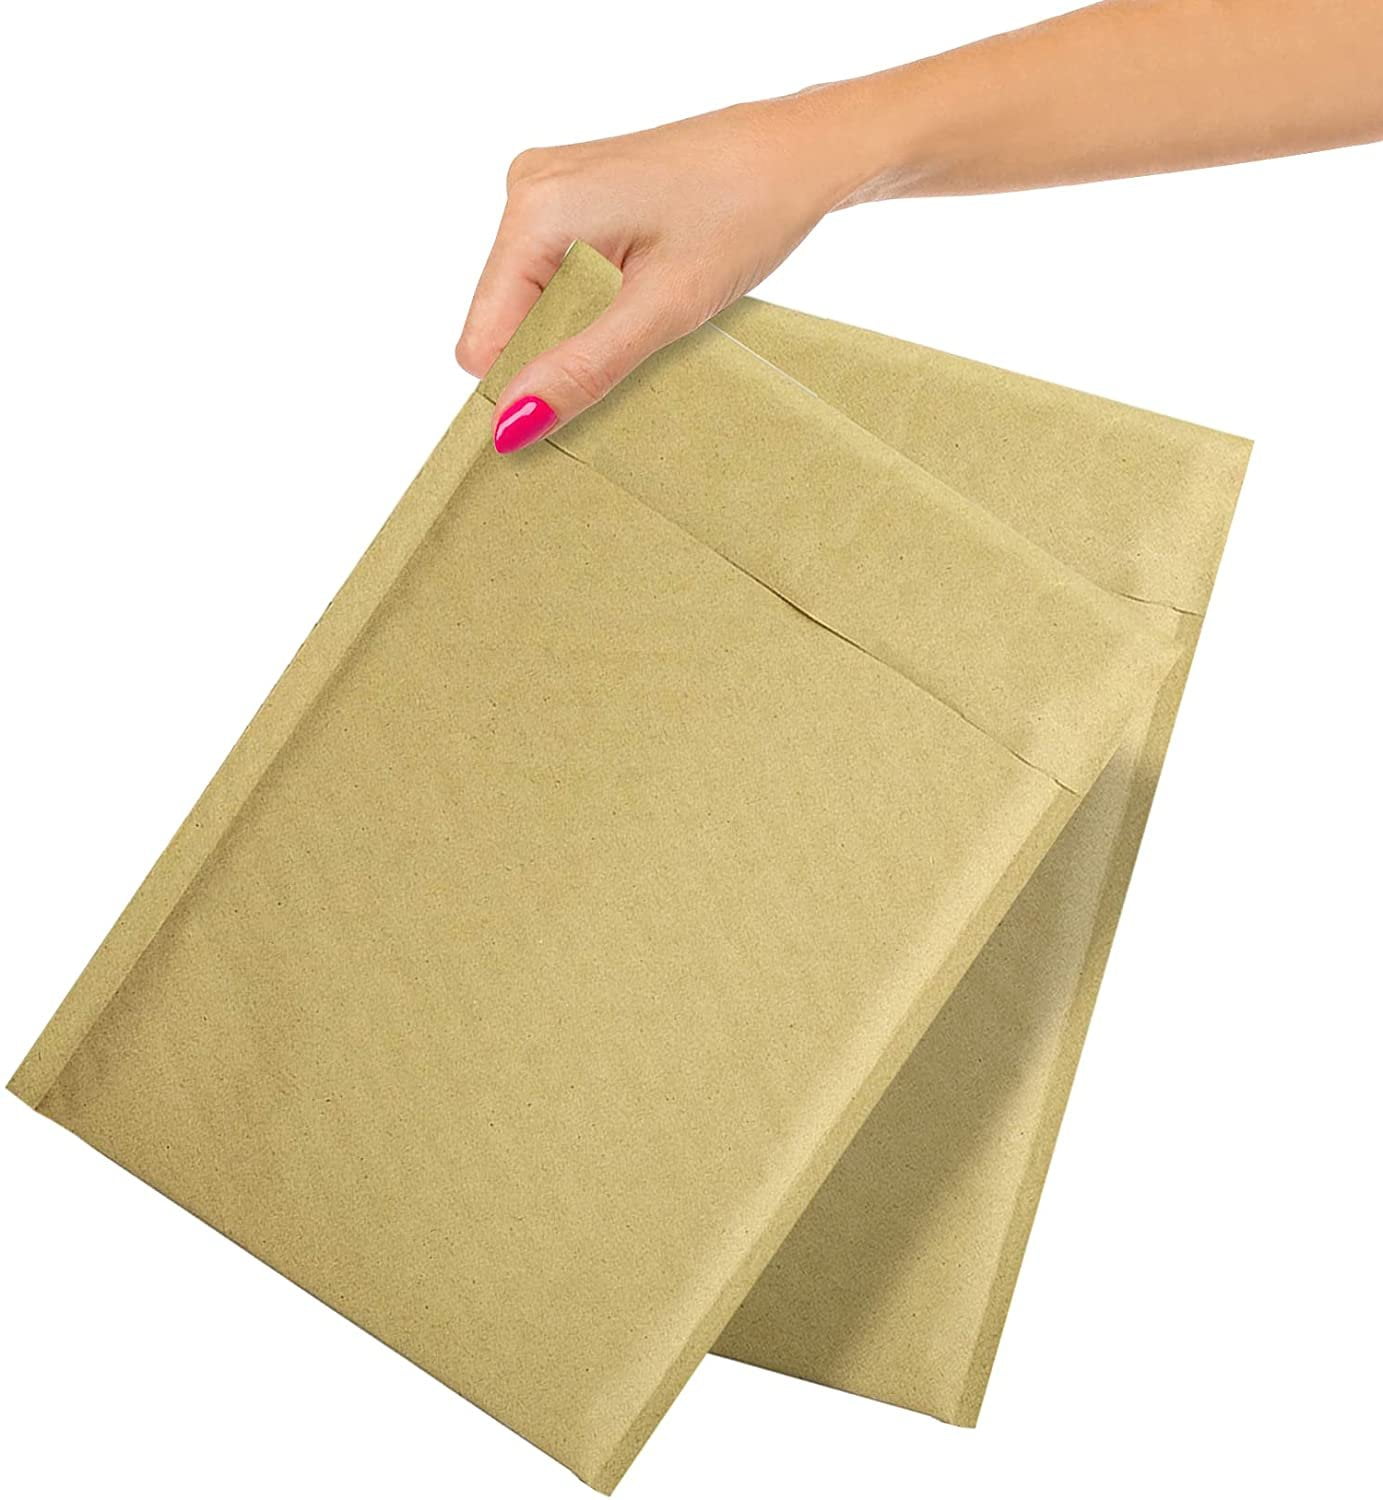 50 PC 7.25x12 Kraft Bubble Mailers Self Seal Shipping Bags Padded Envelope #1